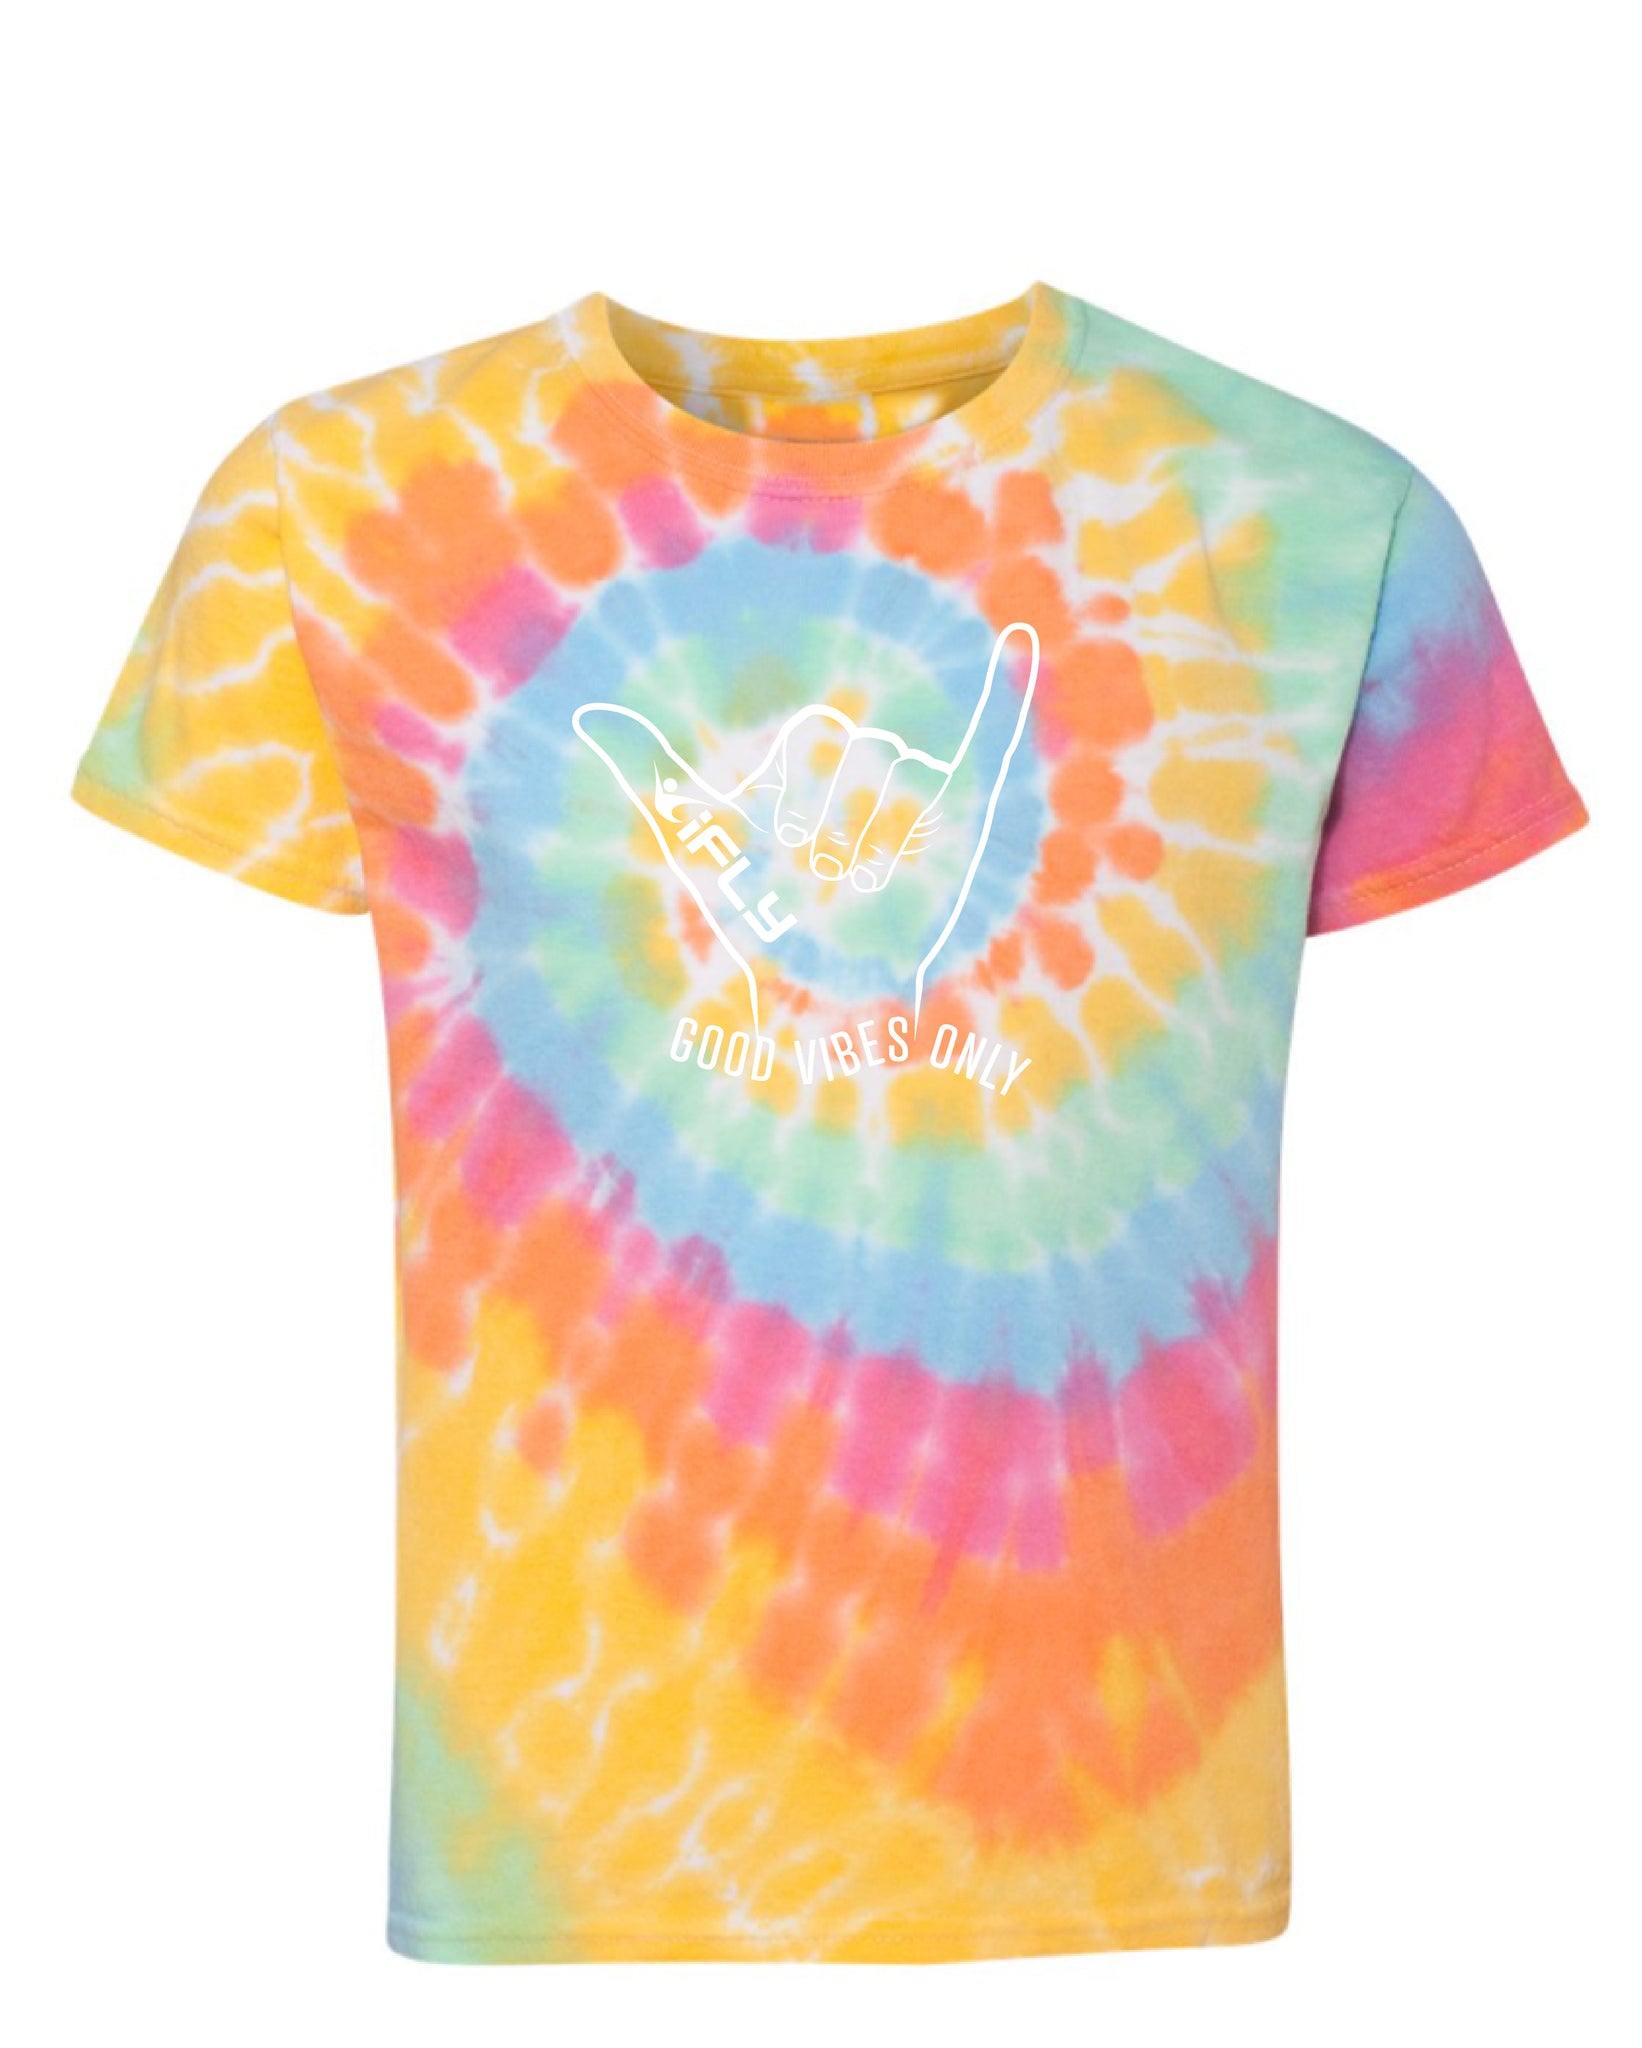 RELAX TIE DYE TEE YOUTH